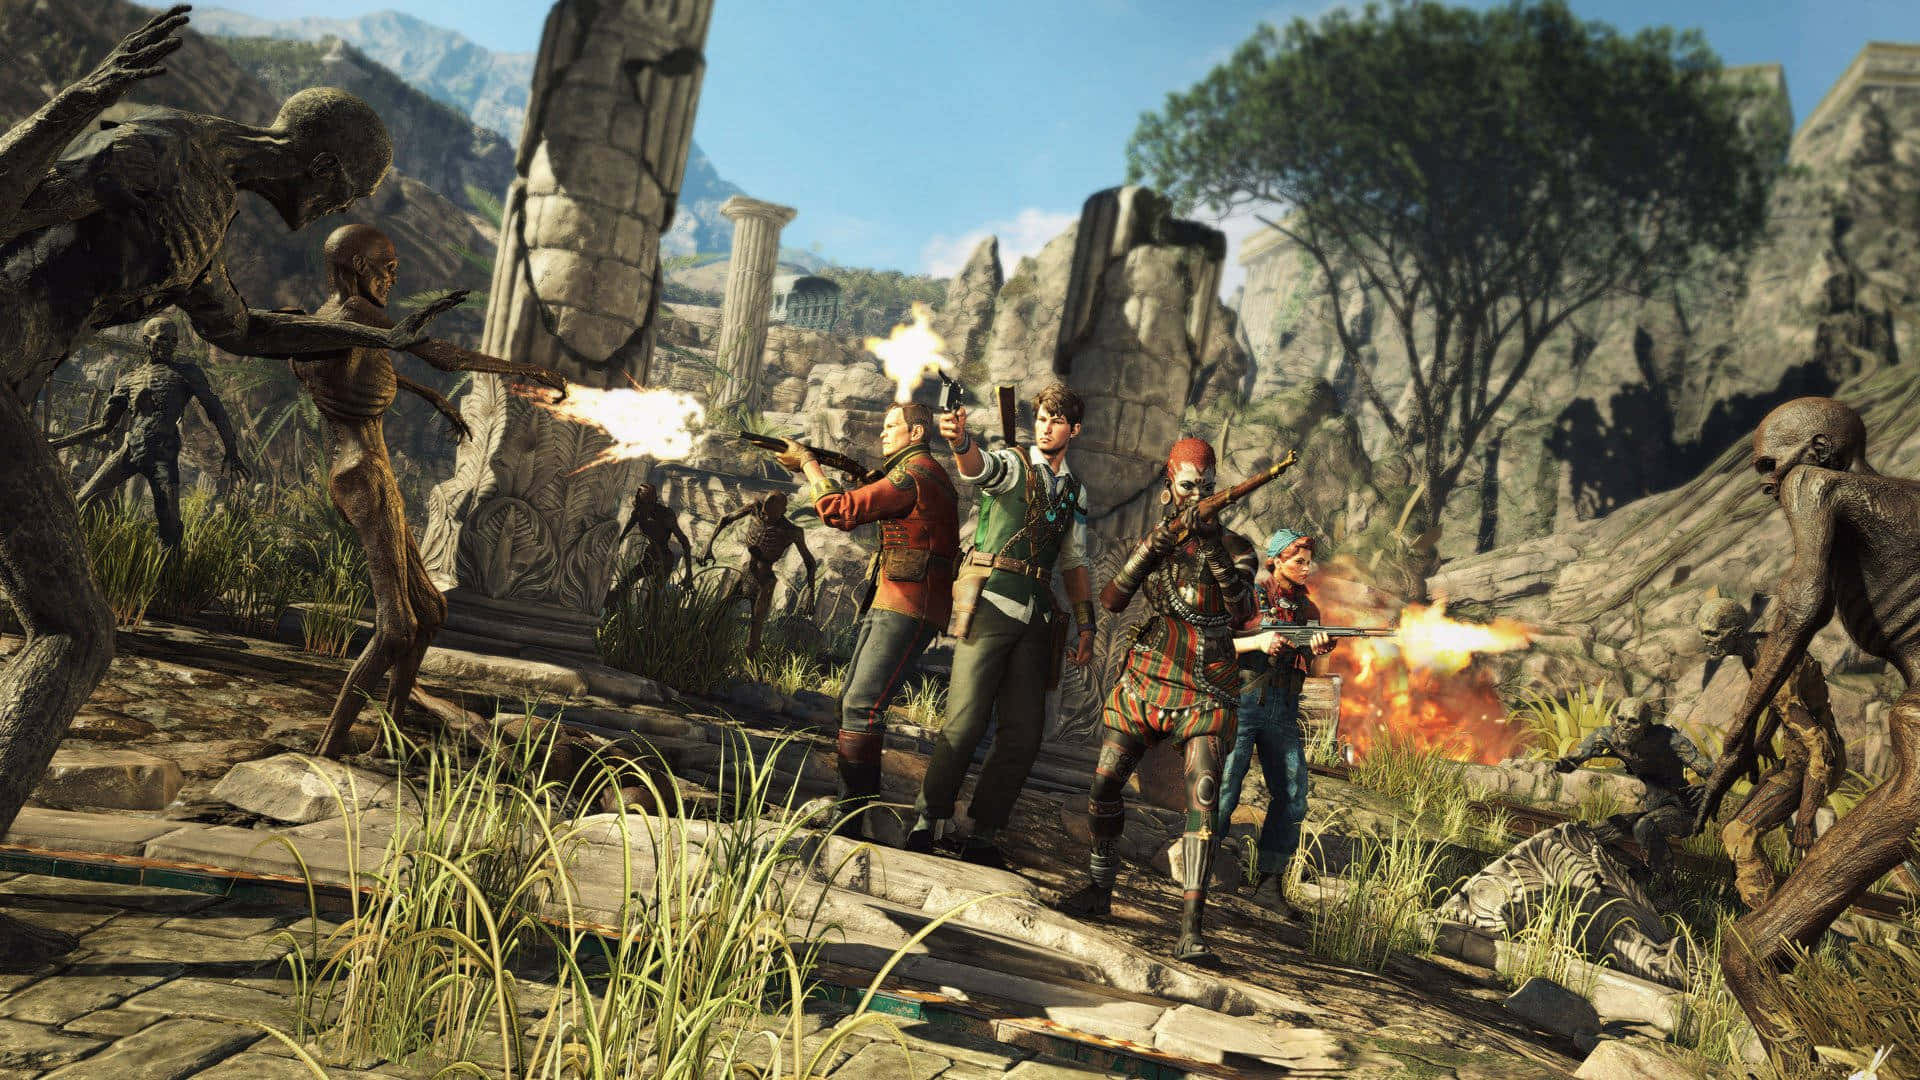 A Group Of People With Guns In A Video Game